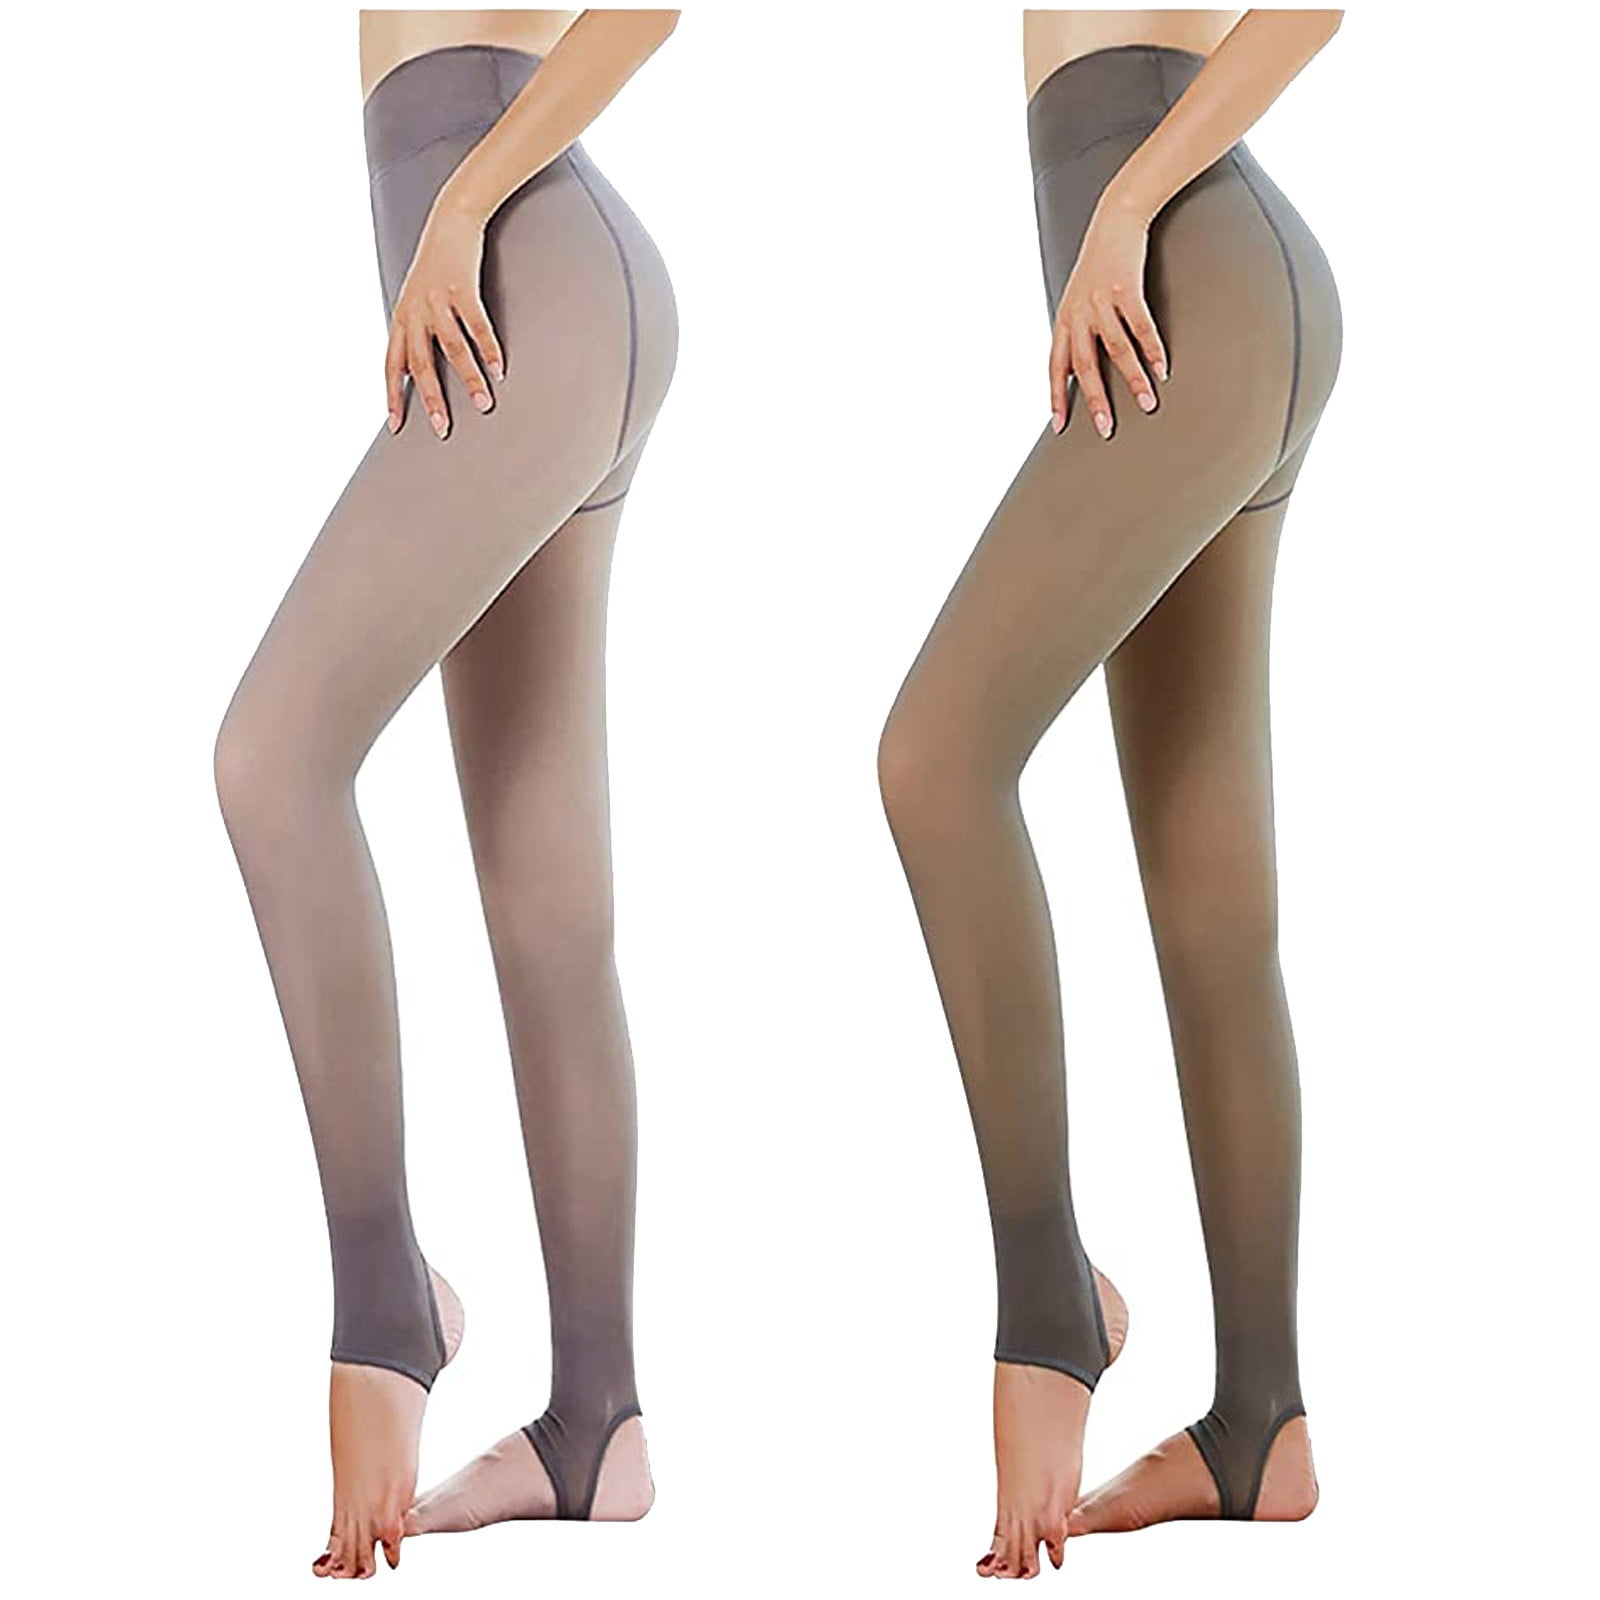 Frostluinai Savings Clearance Women's Thermal Pantyhose Tights Translucent  Elastic Lined Winter Leggings Pants